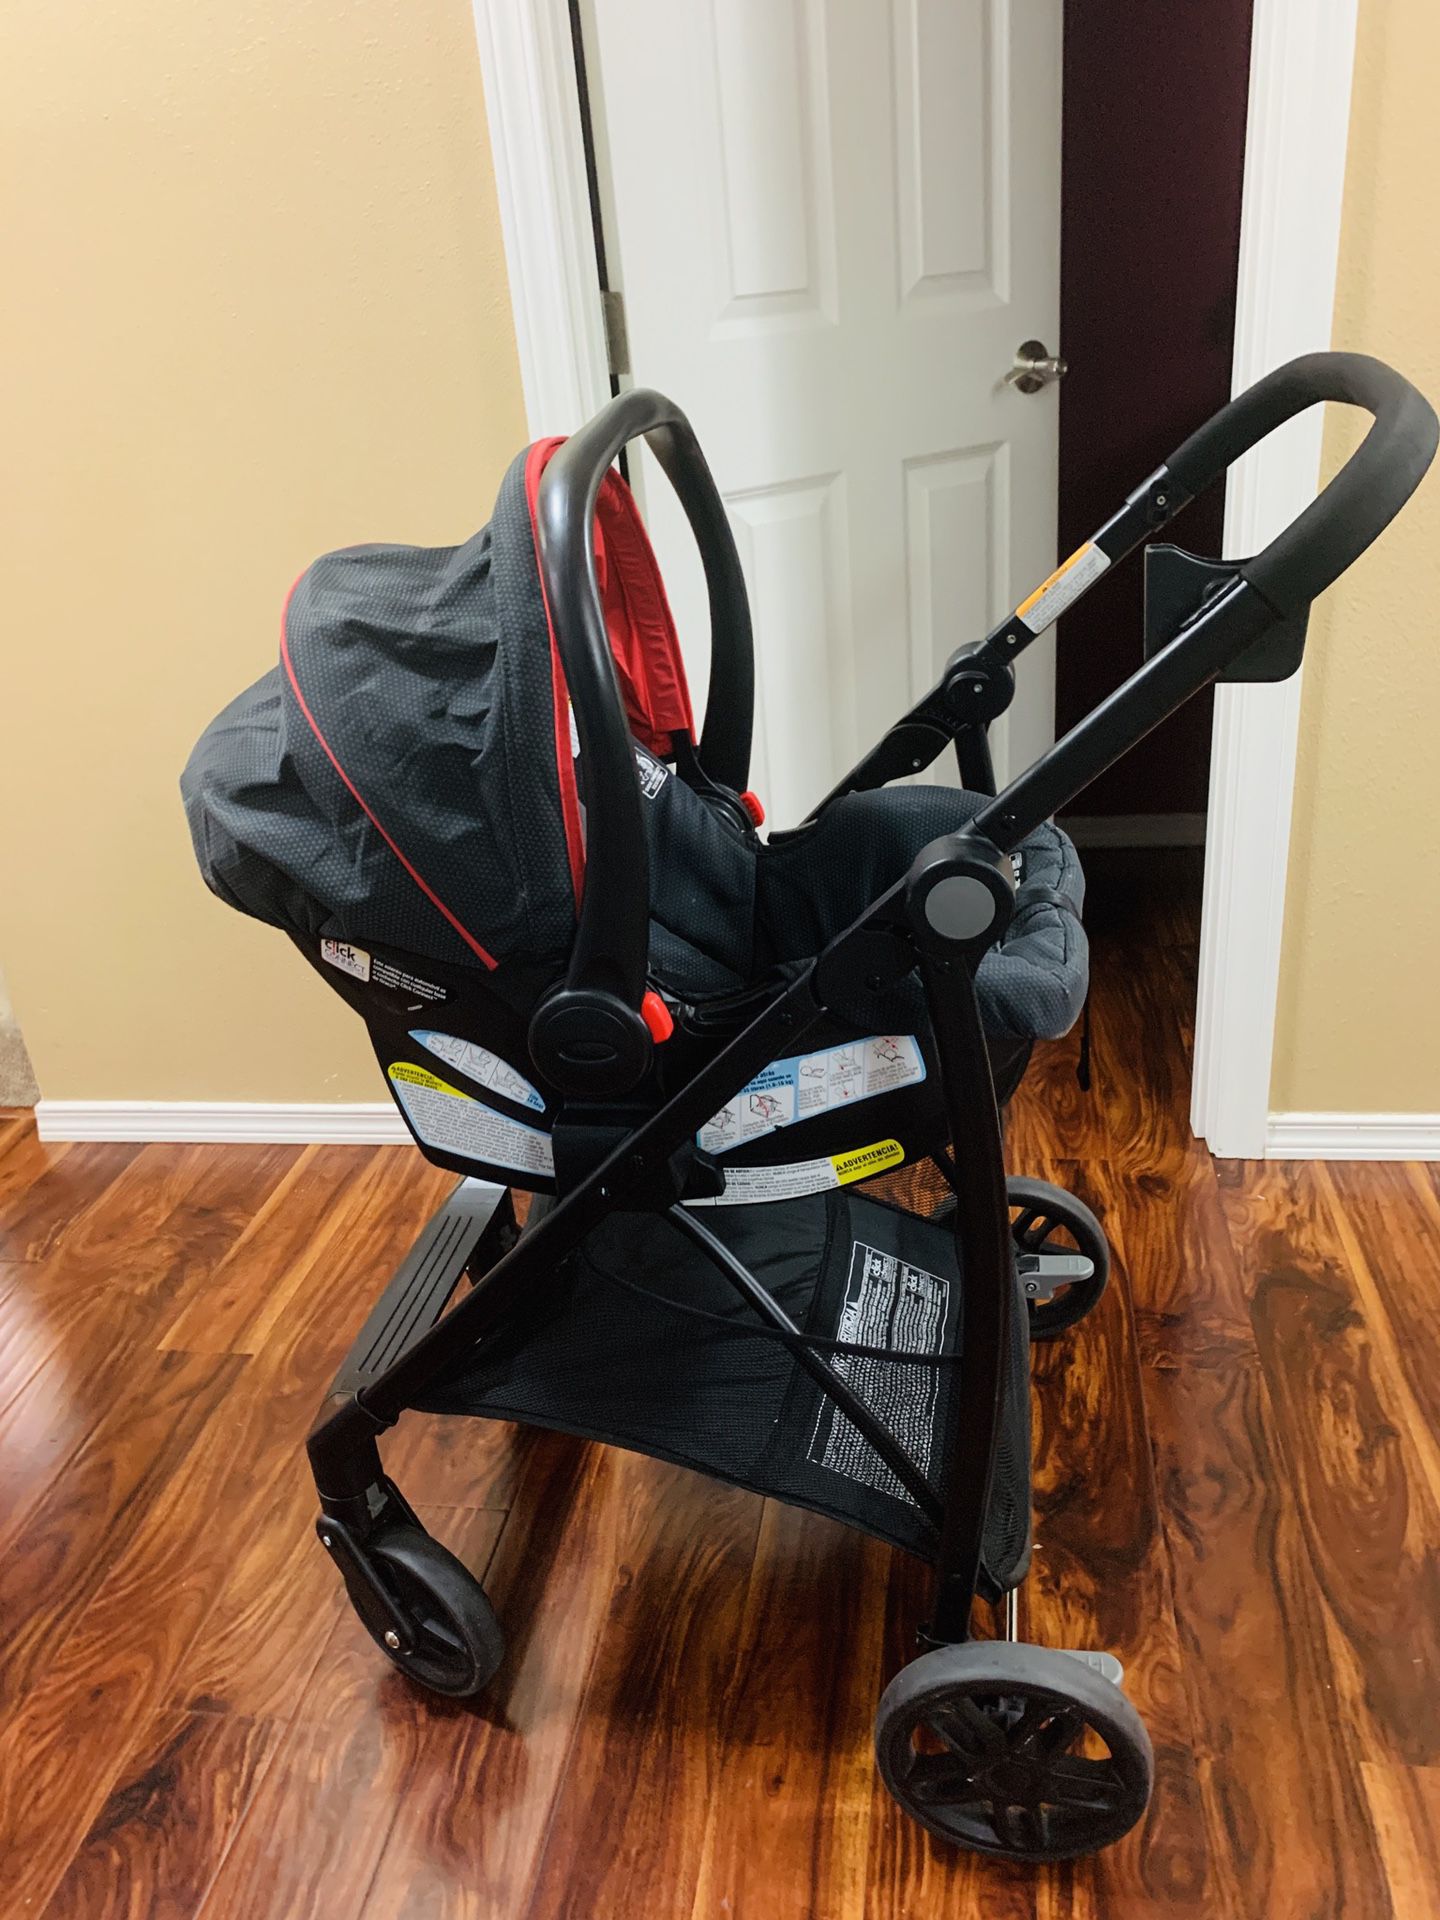 Graco car seat and stroller with two bases